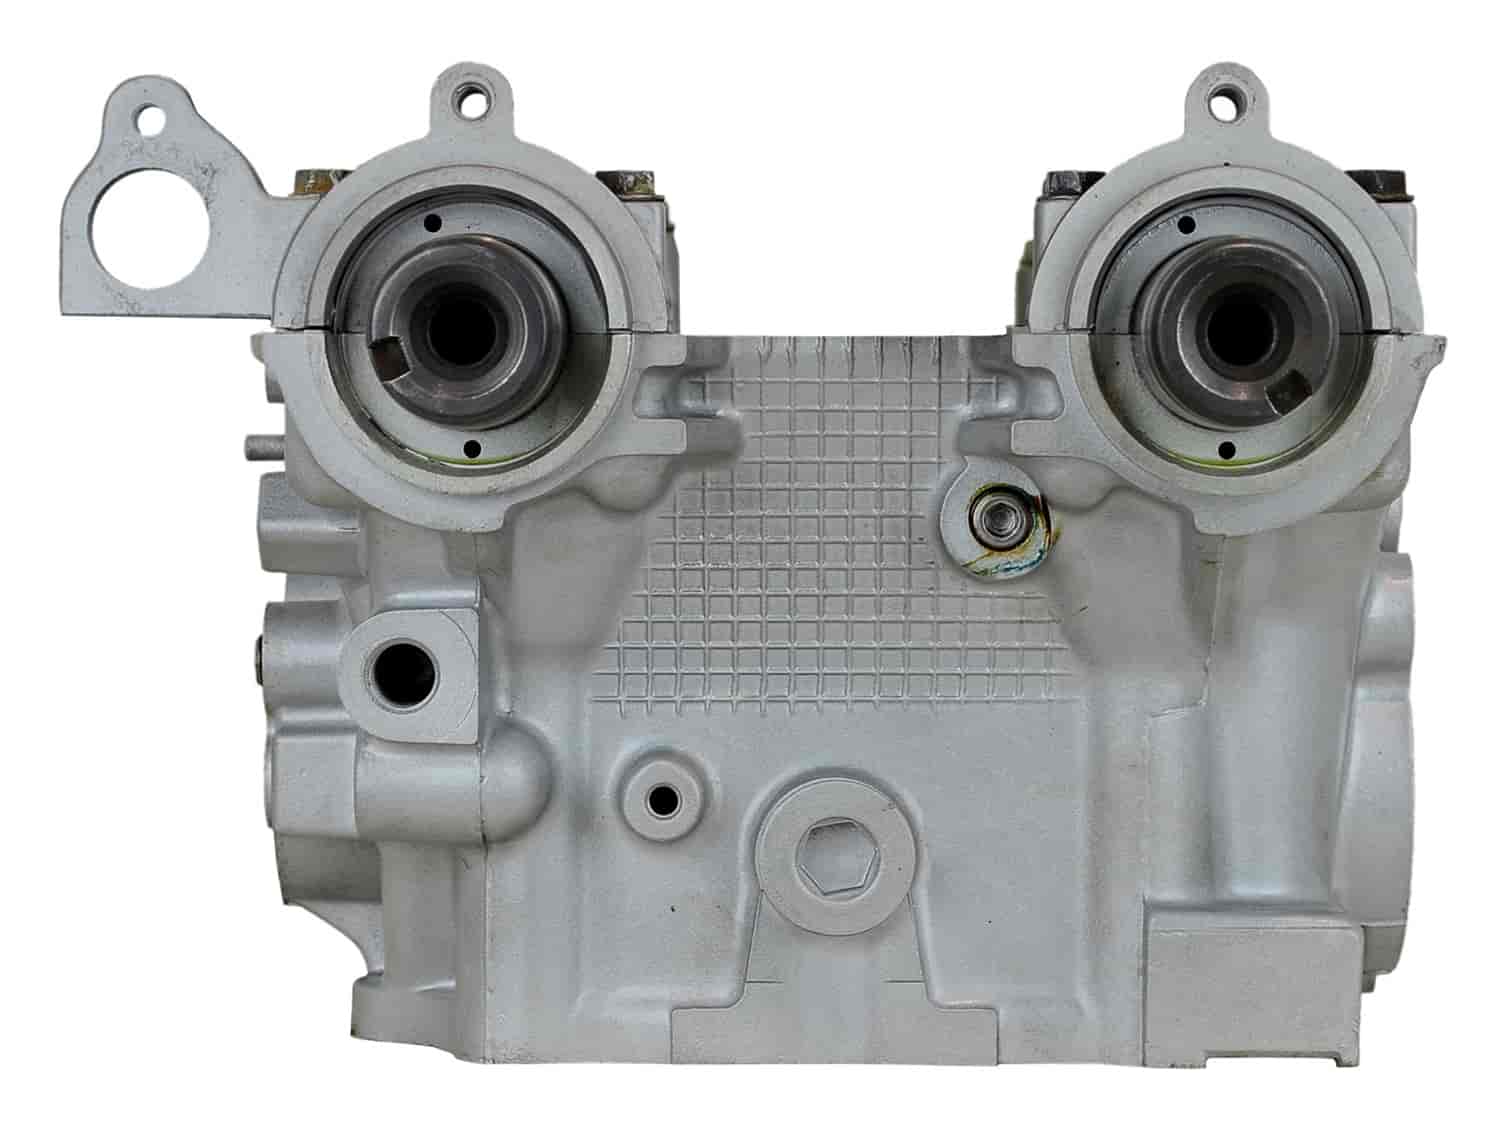 Remanufactured Cylinder Head for 1996-1999 Subaru with 2.5L H4